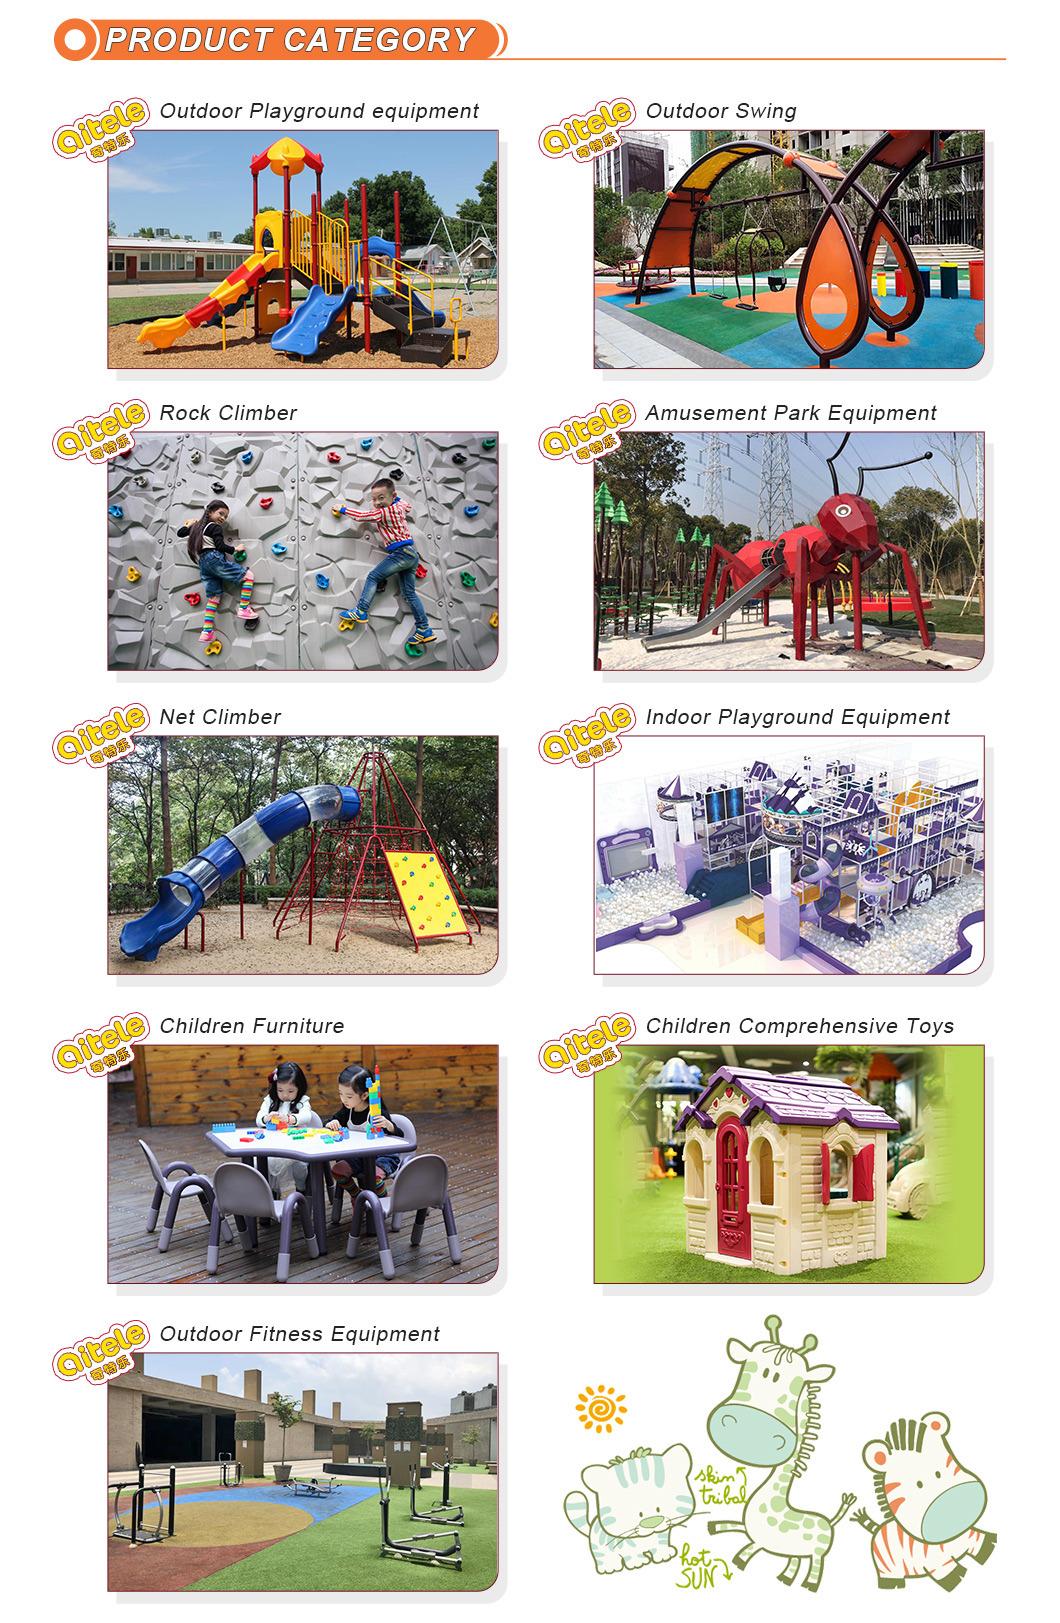 114mm Galvanize Post Outdoor Playground Equipment with Swing